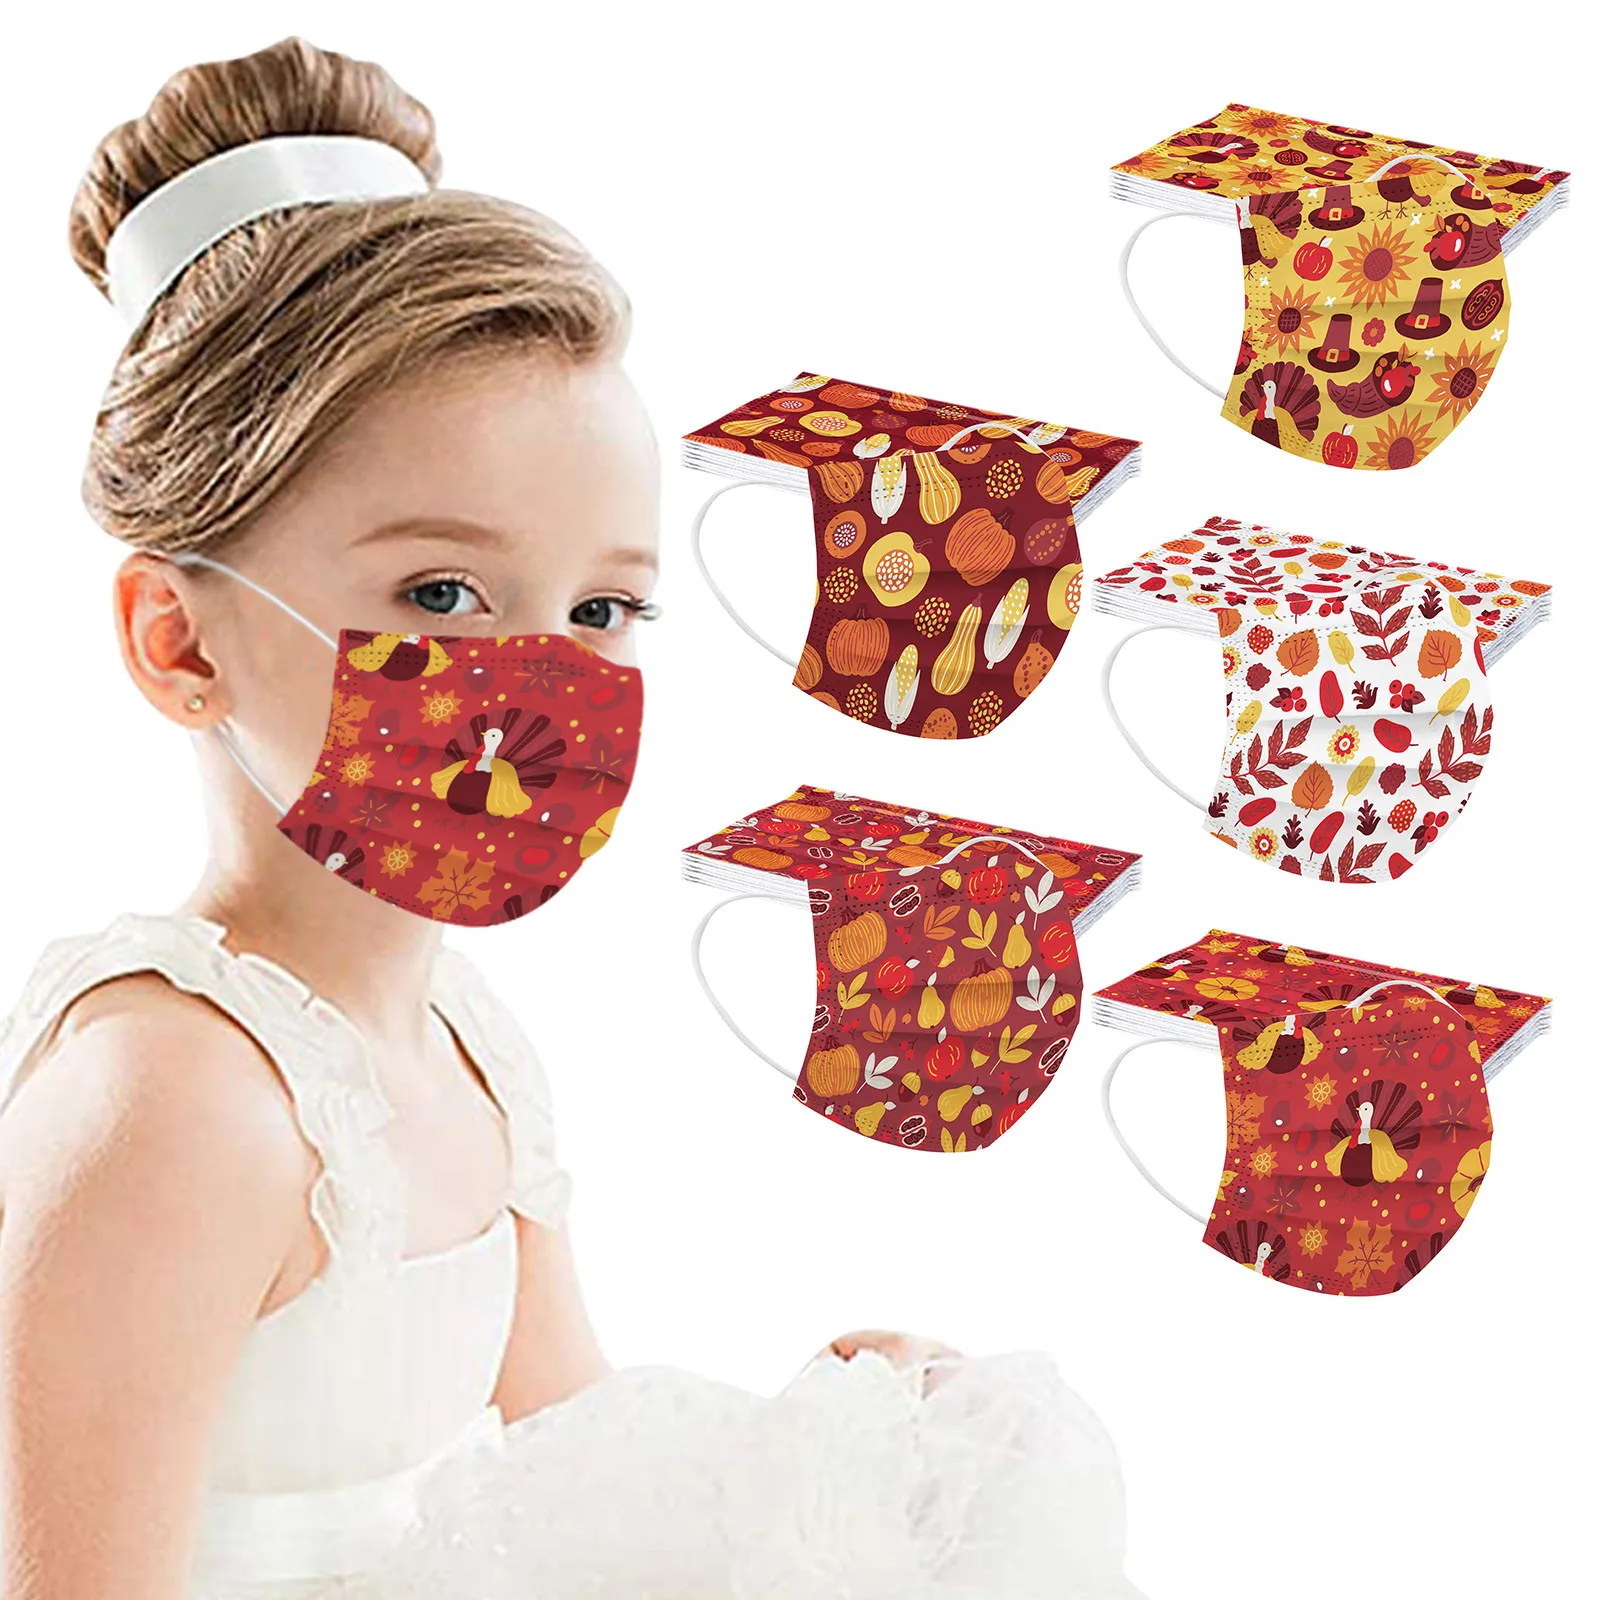 

50pc Disposable Kid Thanksgiving Print Masks For Adults 3-layer Masks Halloween Cosplay Desechables Mascarillas Masque Masks